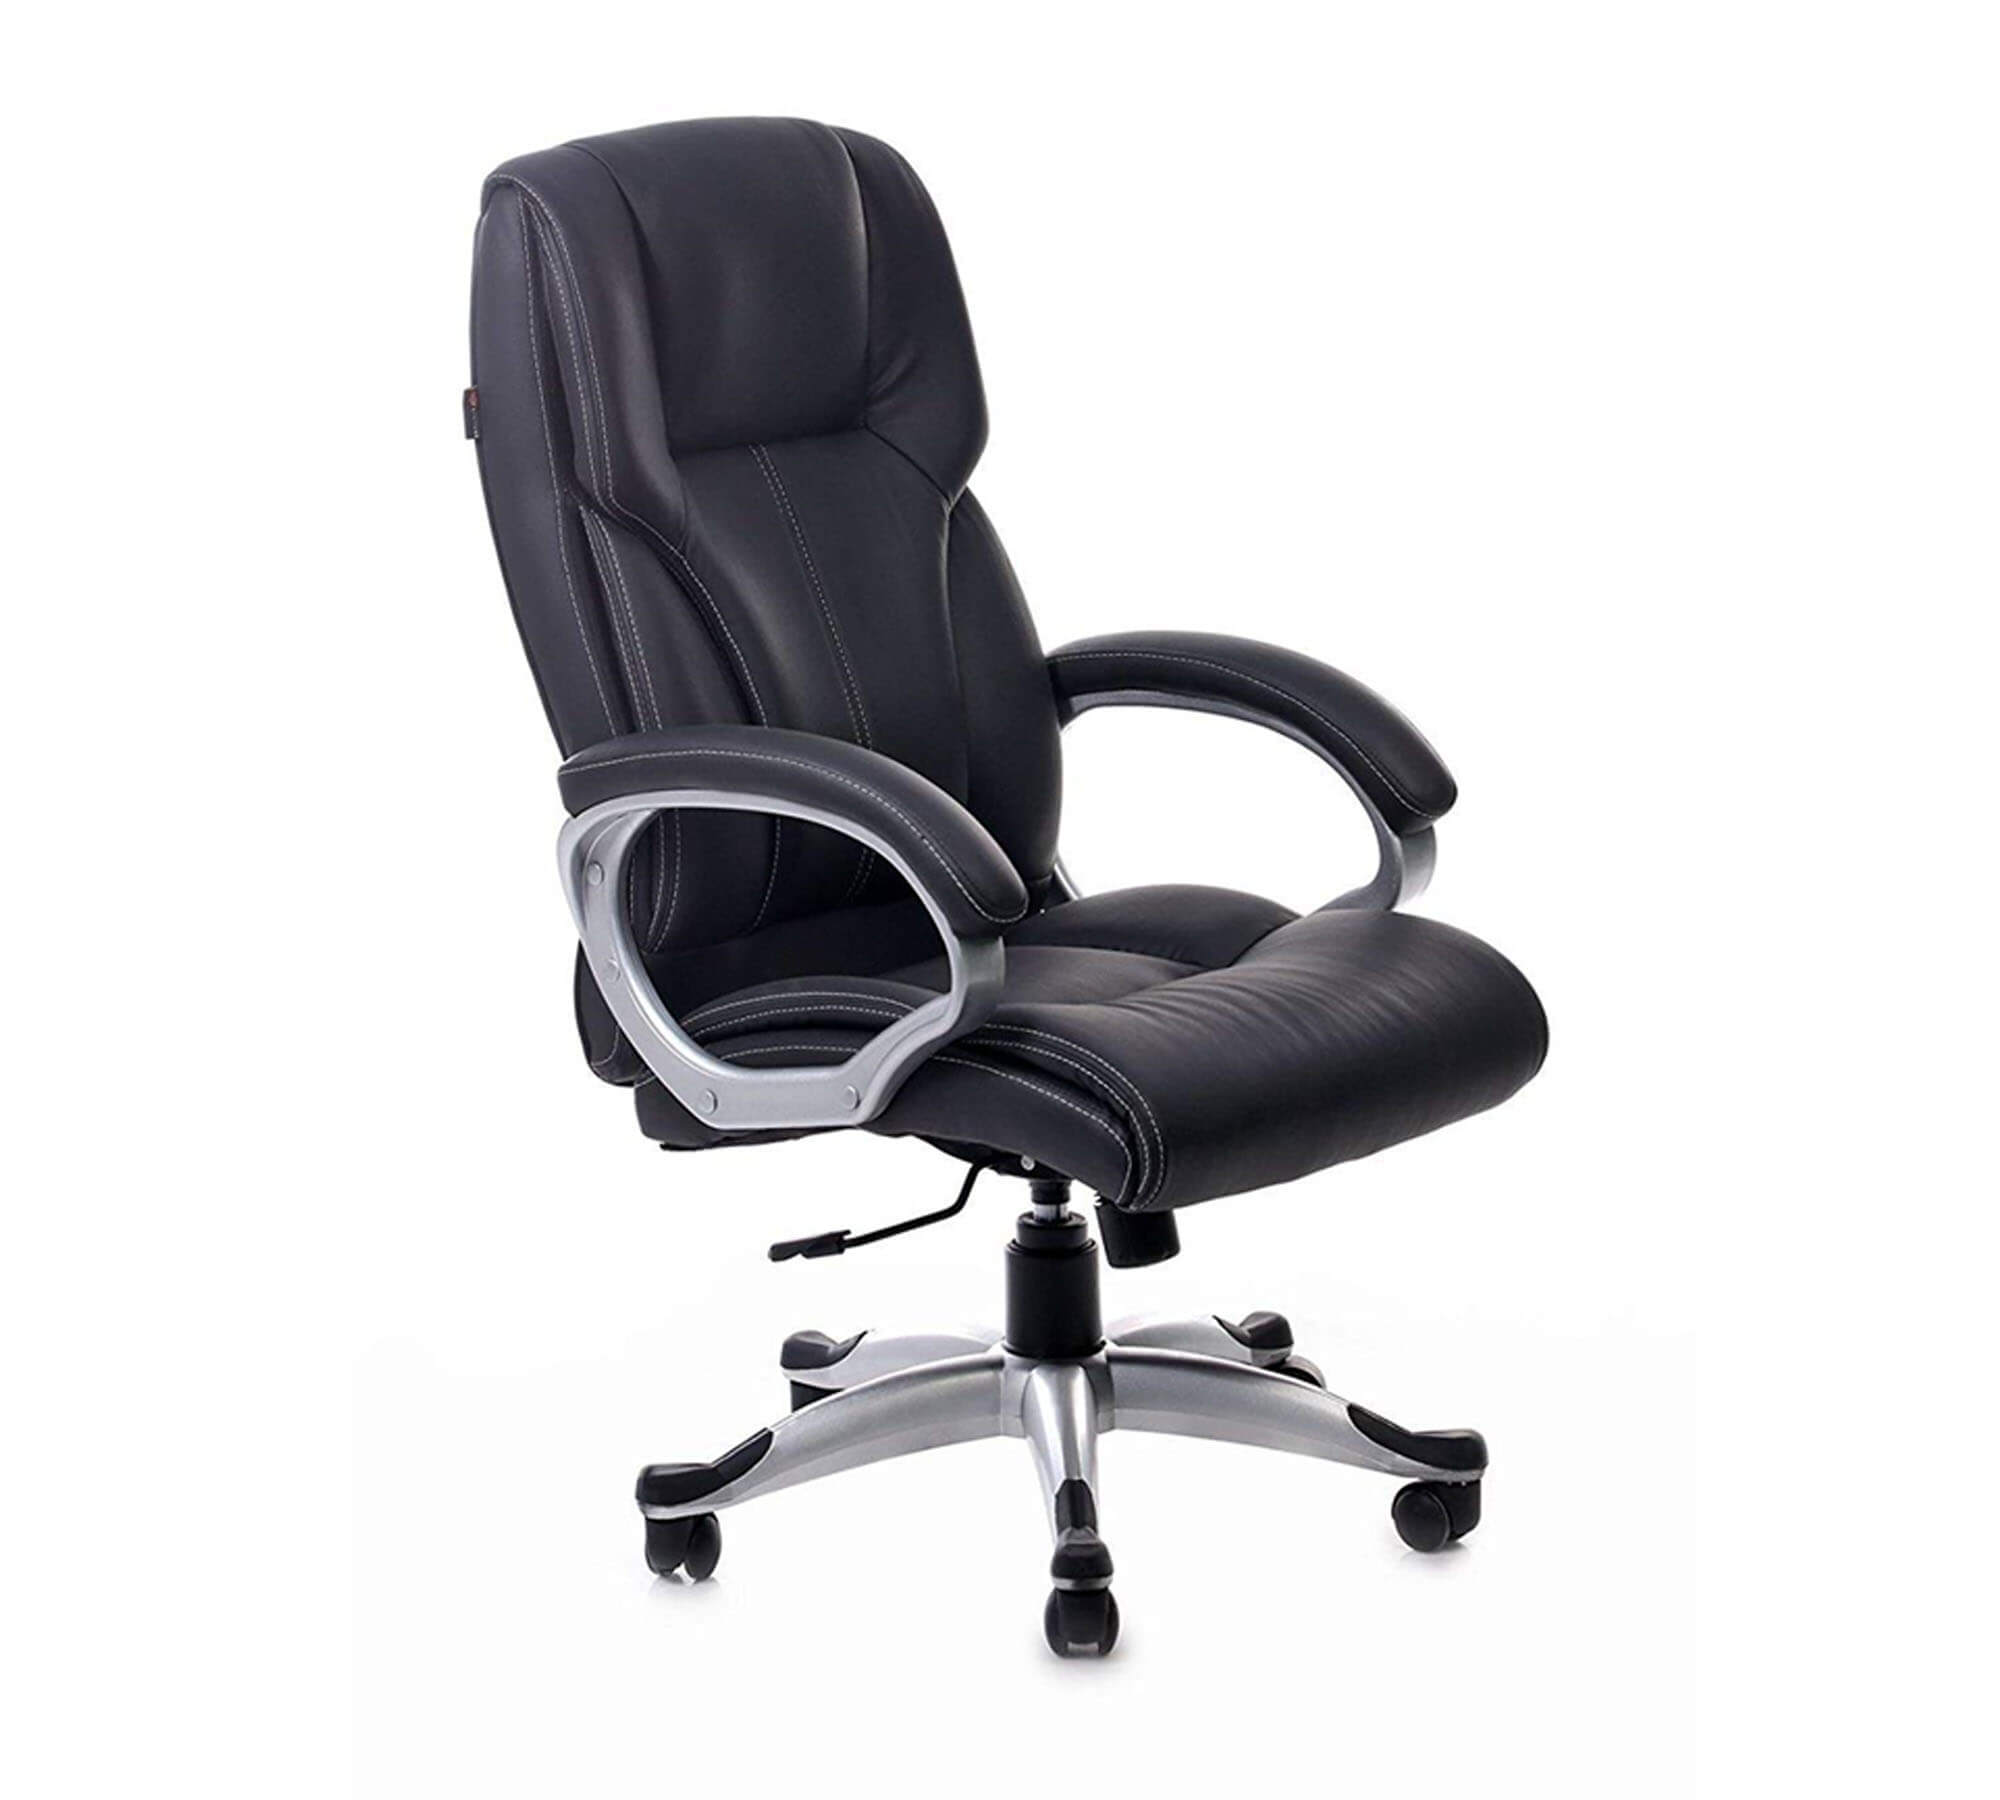 Strongback Director Chair DC-9014-BKGR 2.0 - Sims Furniture LTD